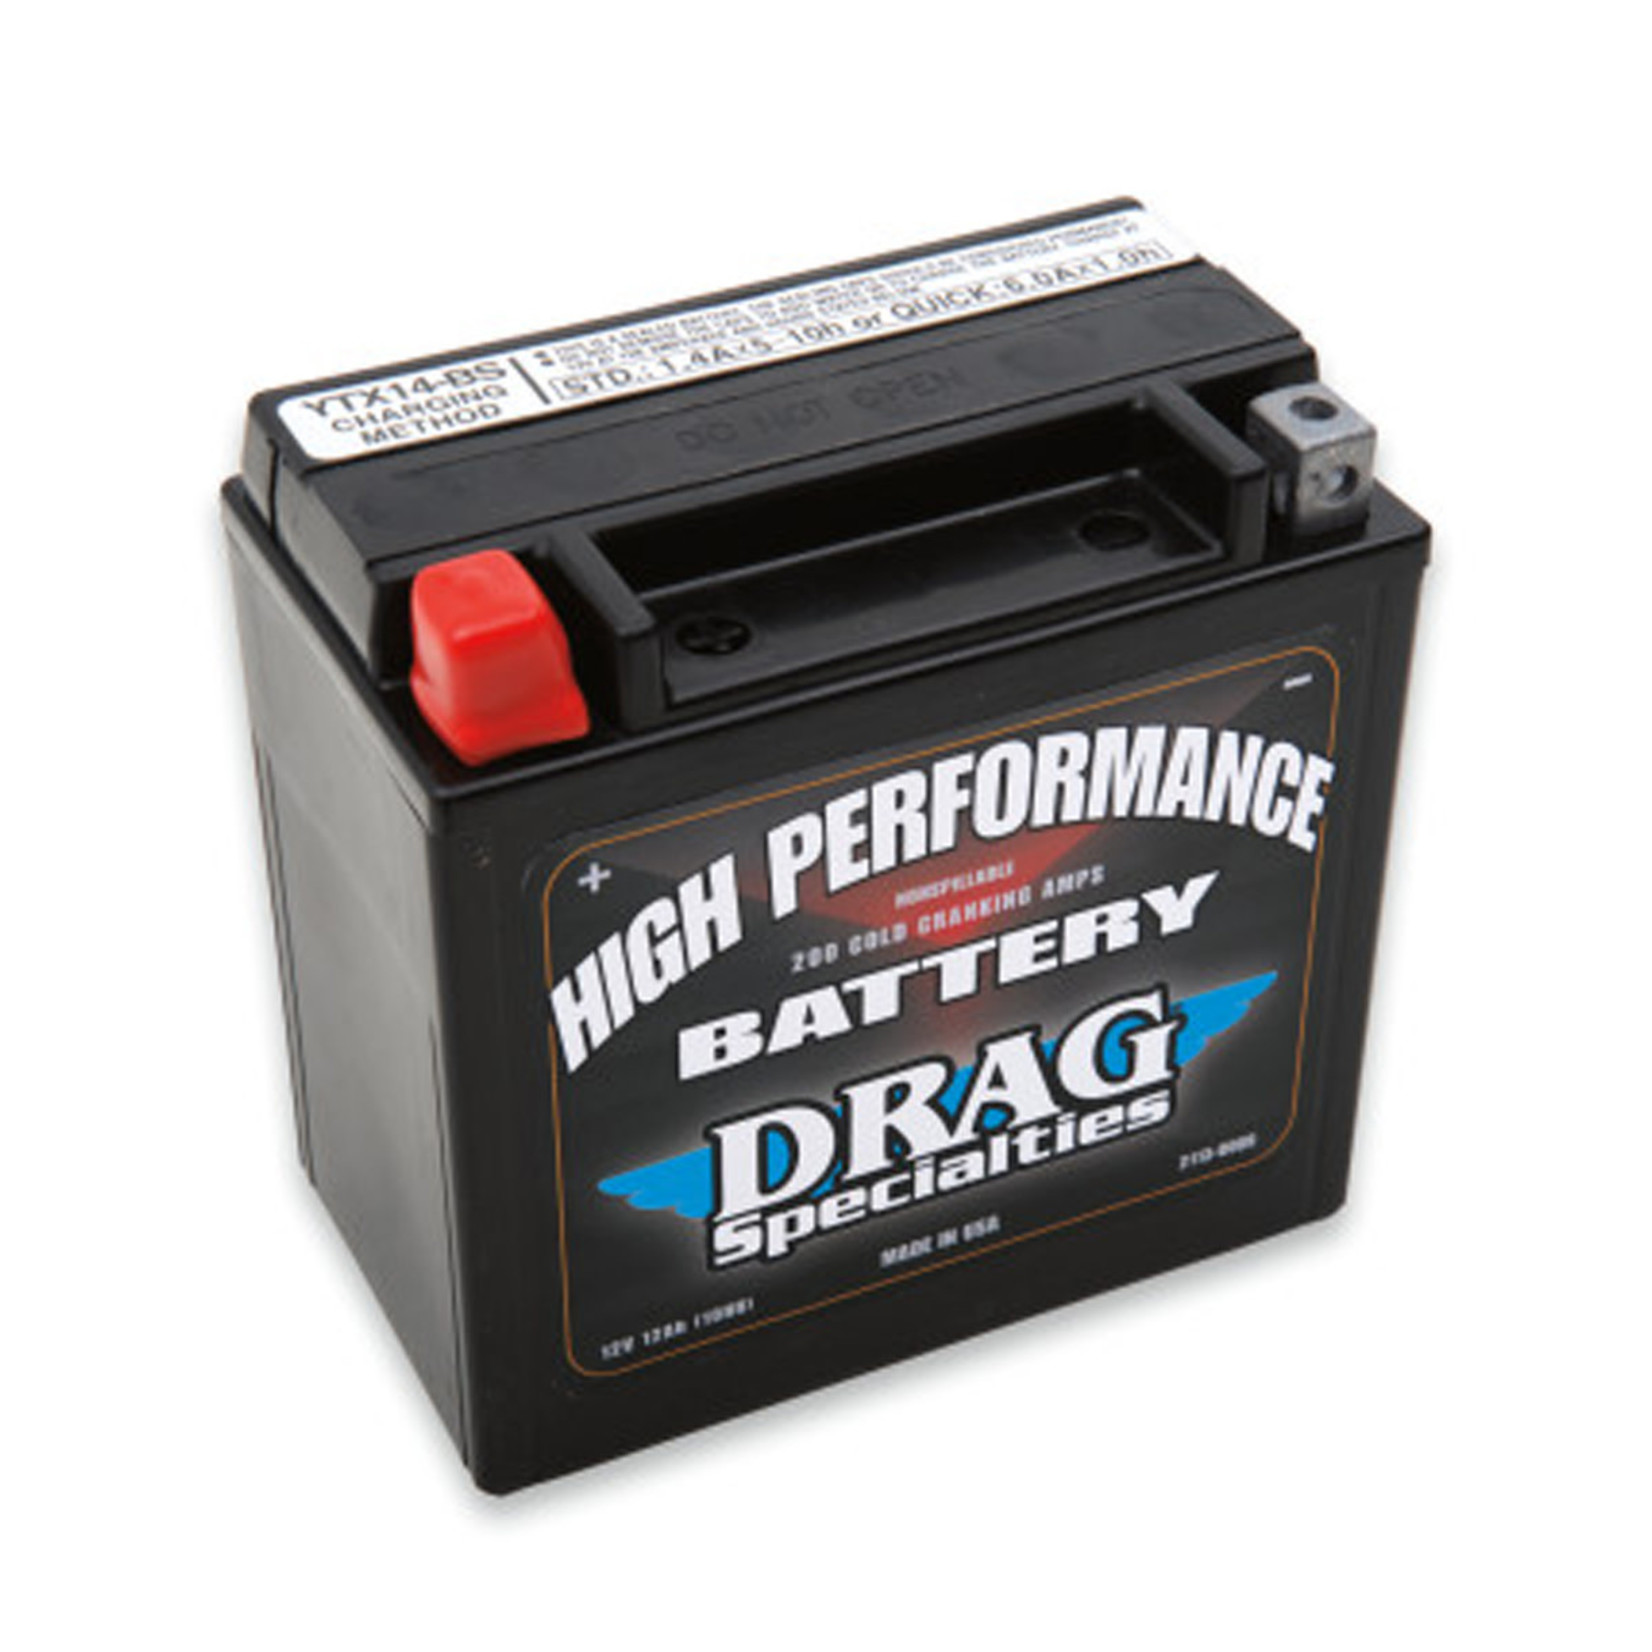 DRAG SPECIALITIES DRAG SPECIALTIES HIGH PERFORMANCE BATTERY